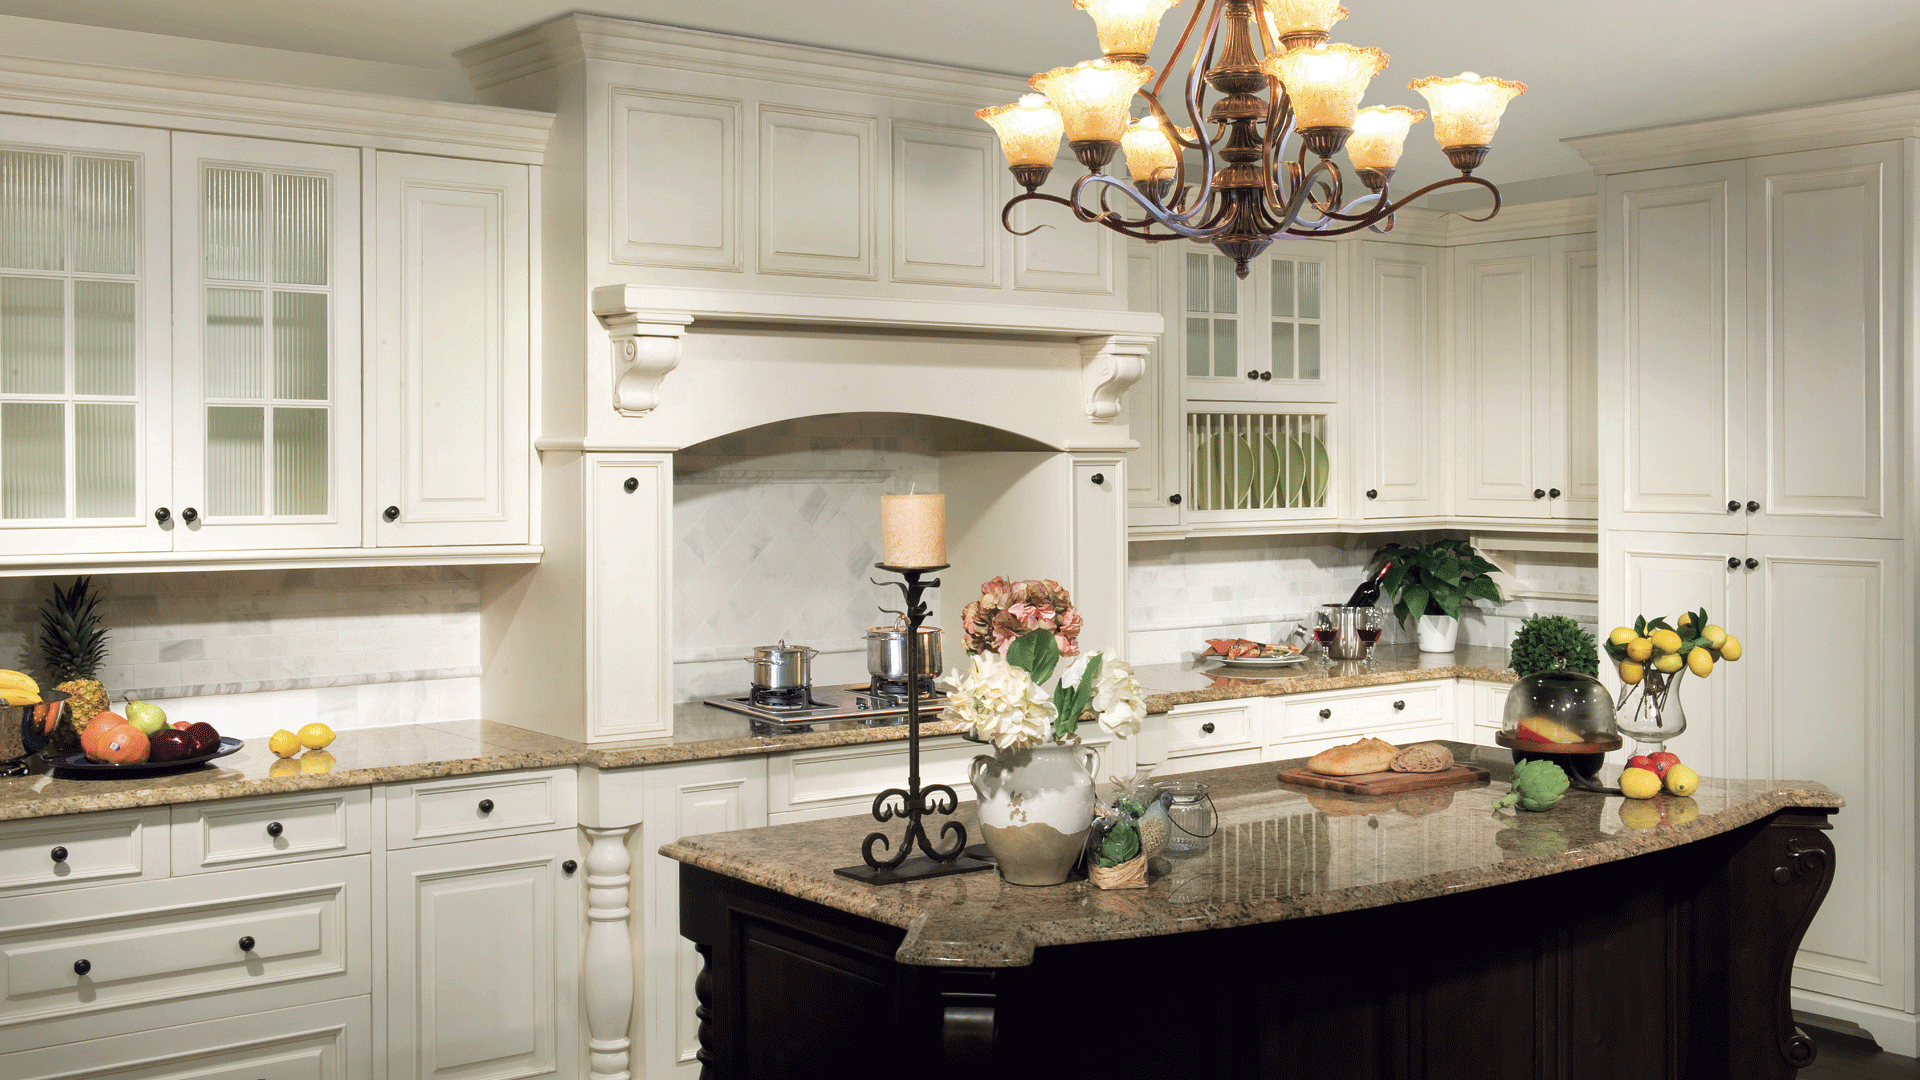 St. Martin cream kitchen cabinets with grey countertops